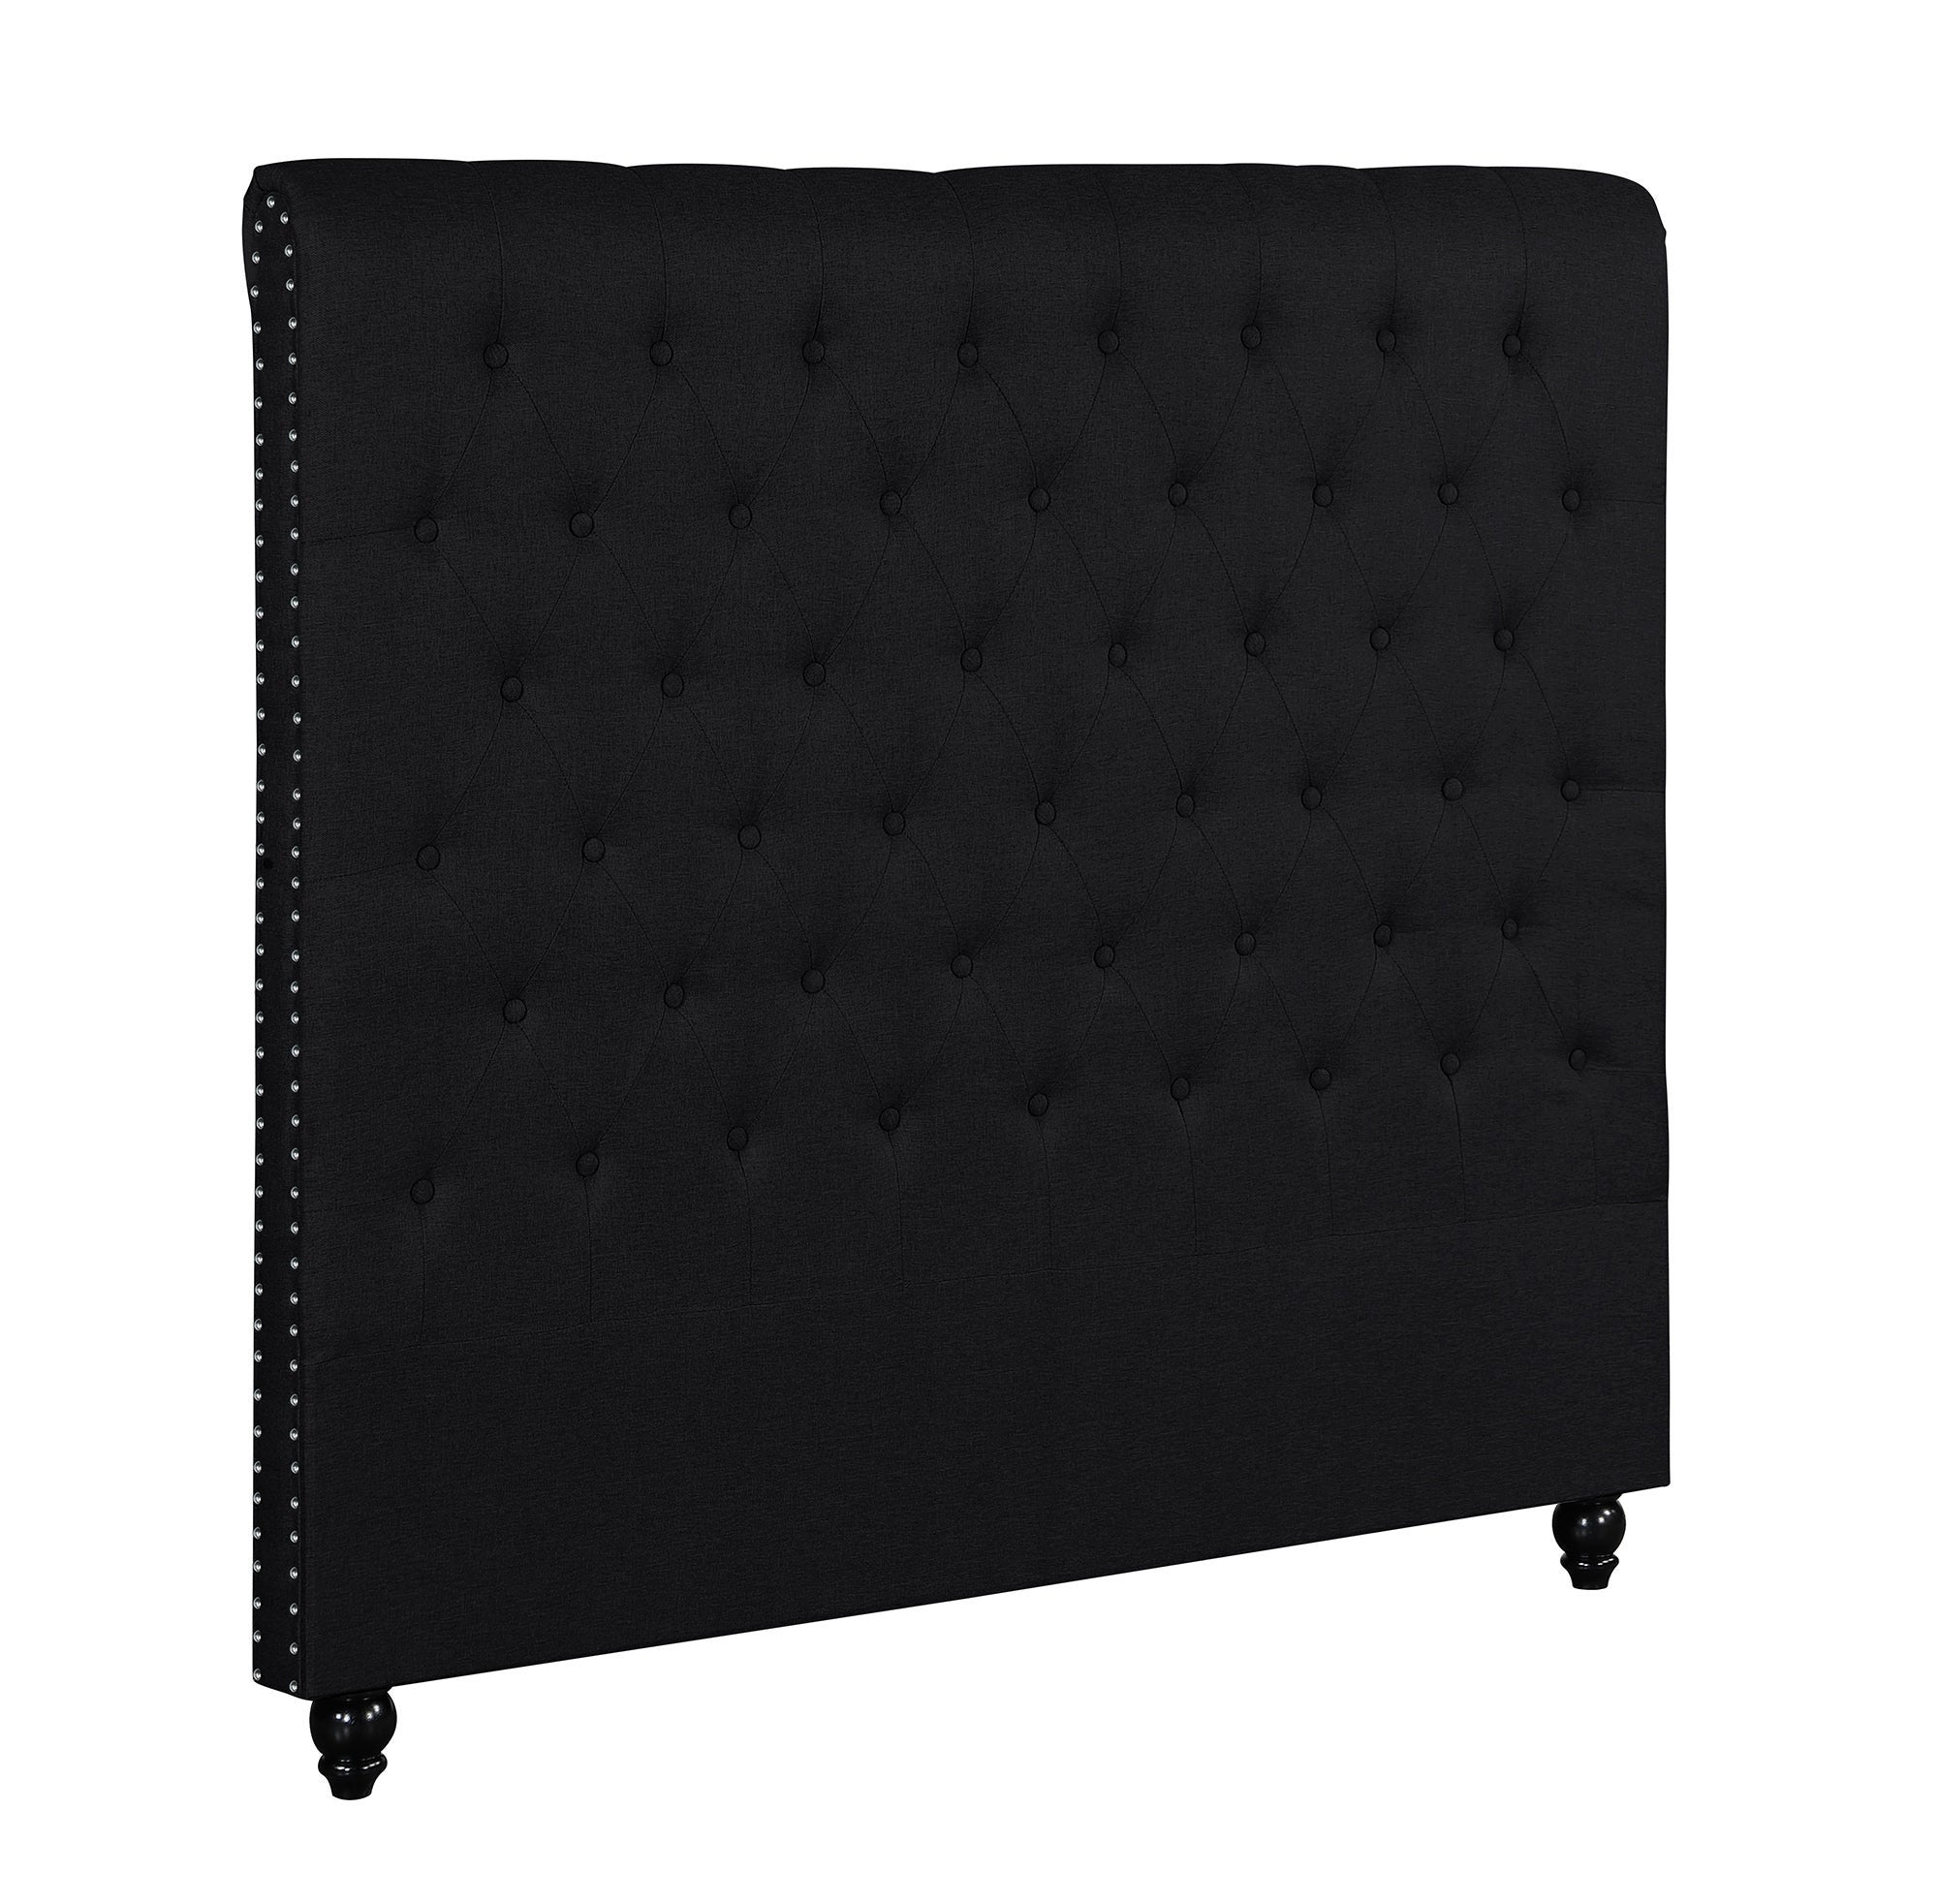 Foret Bed Head Queen Size Upholstered Headboard Bedhead Frame